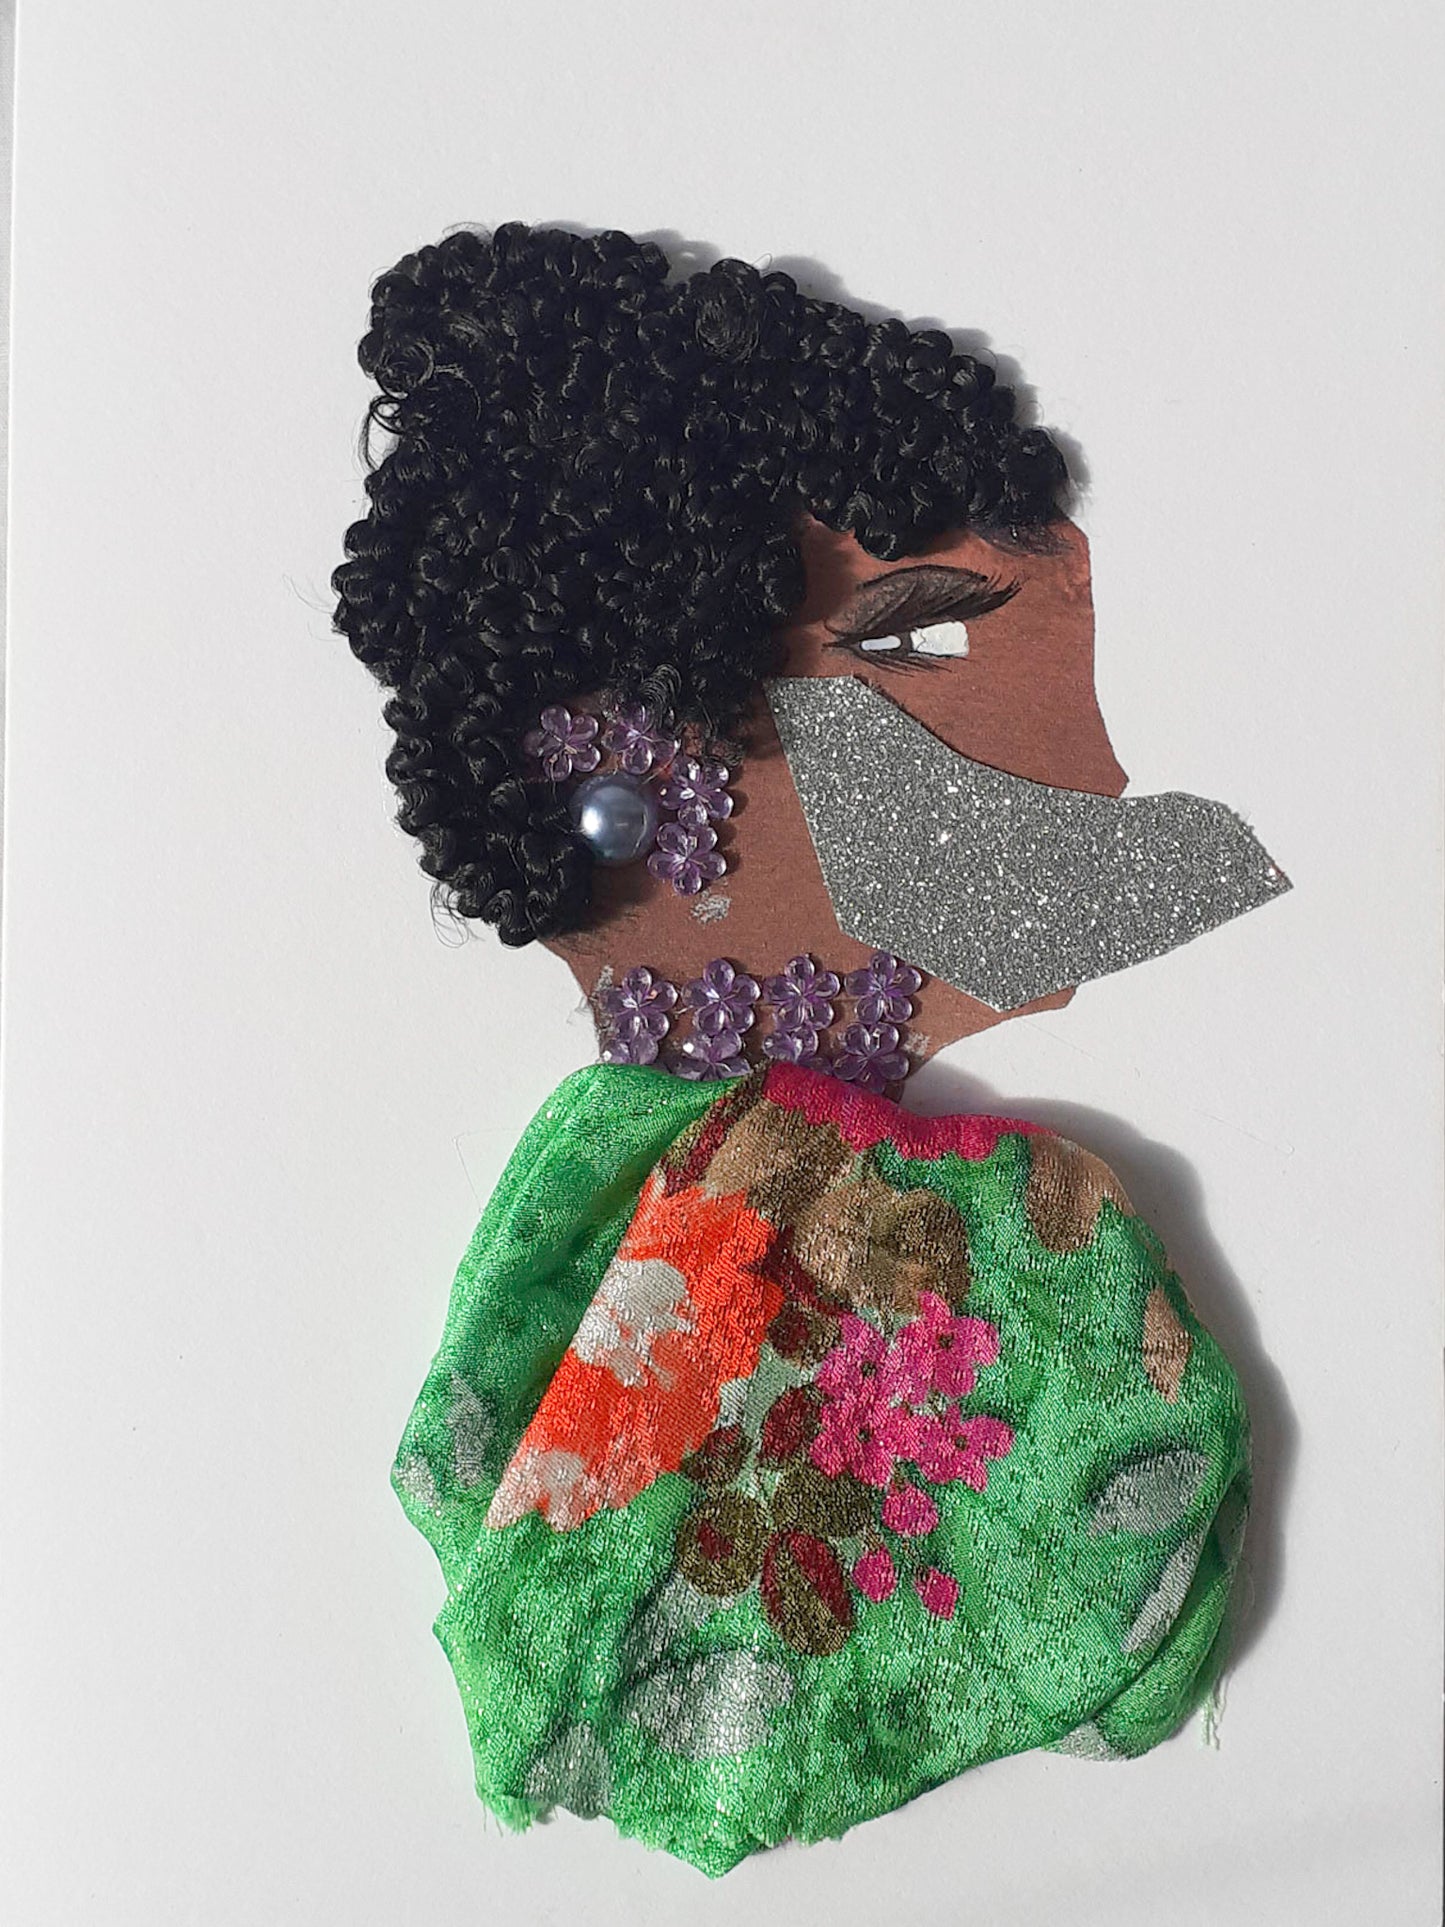 I designed this card of a woman named Maskie. She has a brown skin tone and is wearing a face mask that is green and glittery. Alice has a green flowery dress and matching purple earrings and has her hair is in a bun.